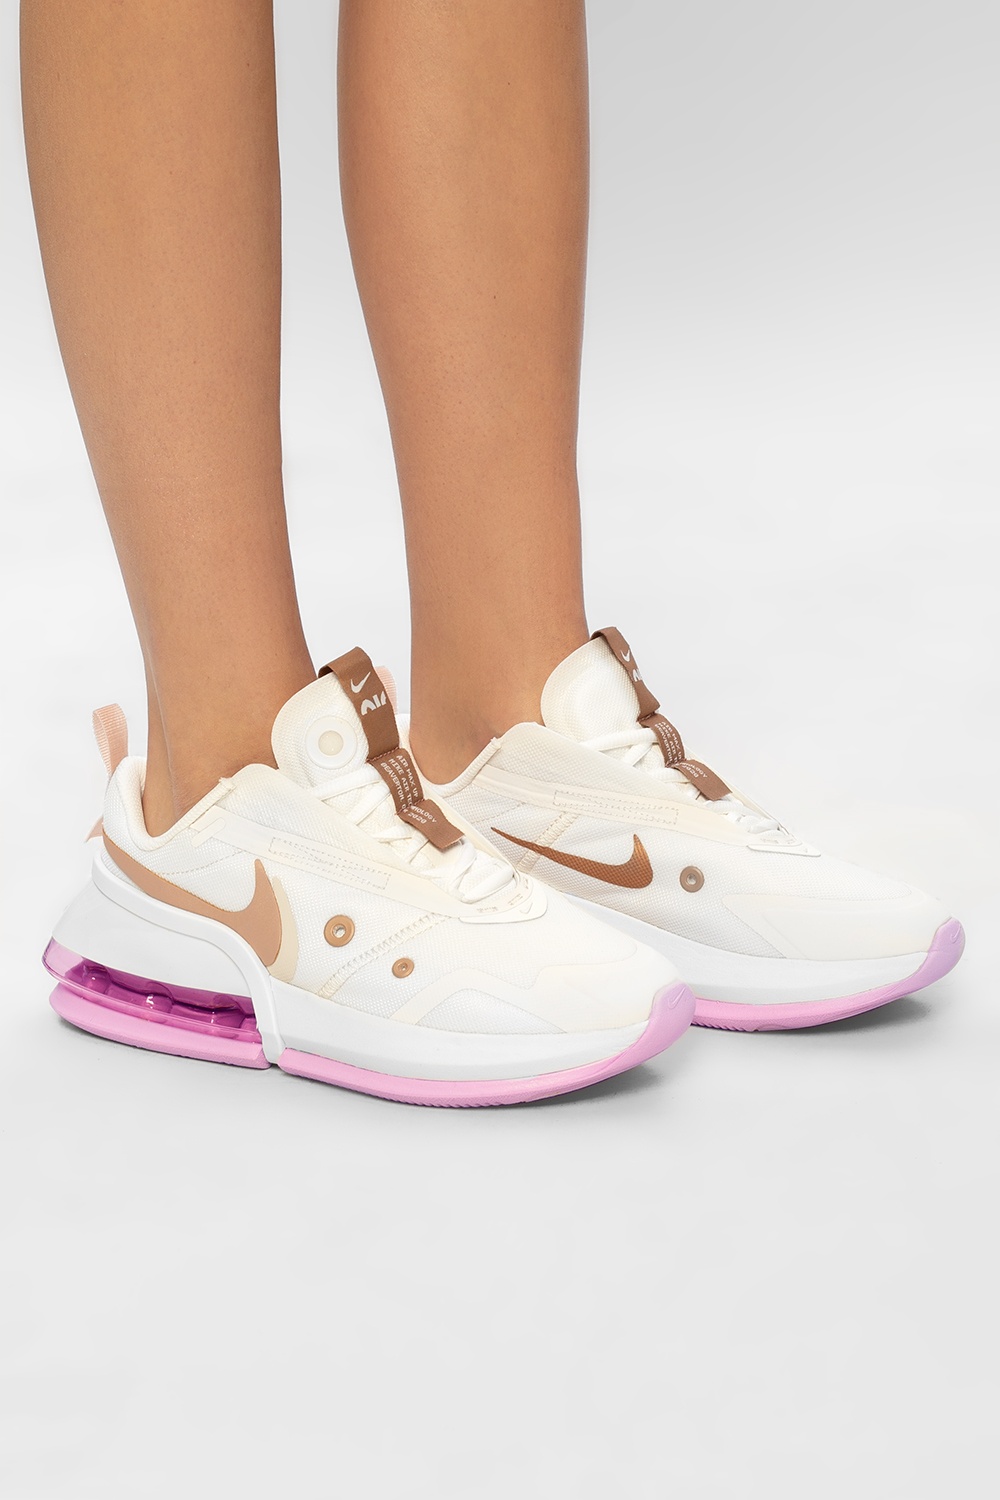 women's air max up